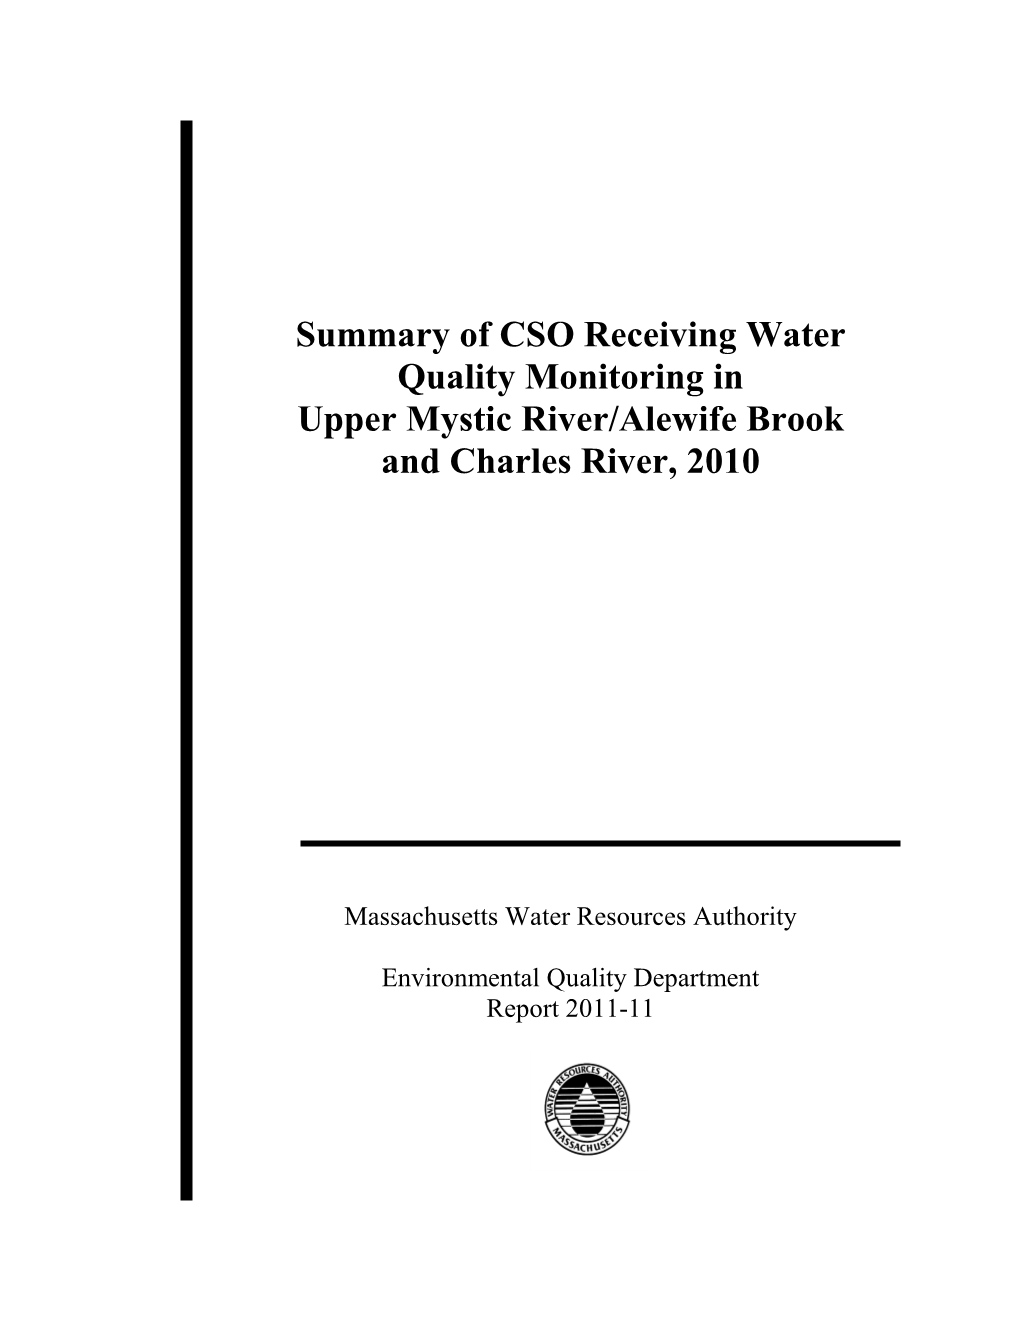 Summary of CSO Receiving Water Quality Monitoring in Upper Mystic River/Alewife Brook and Charles River, 2010